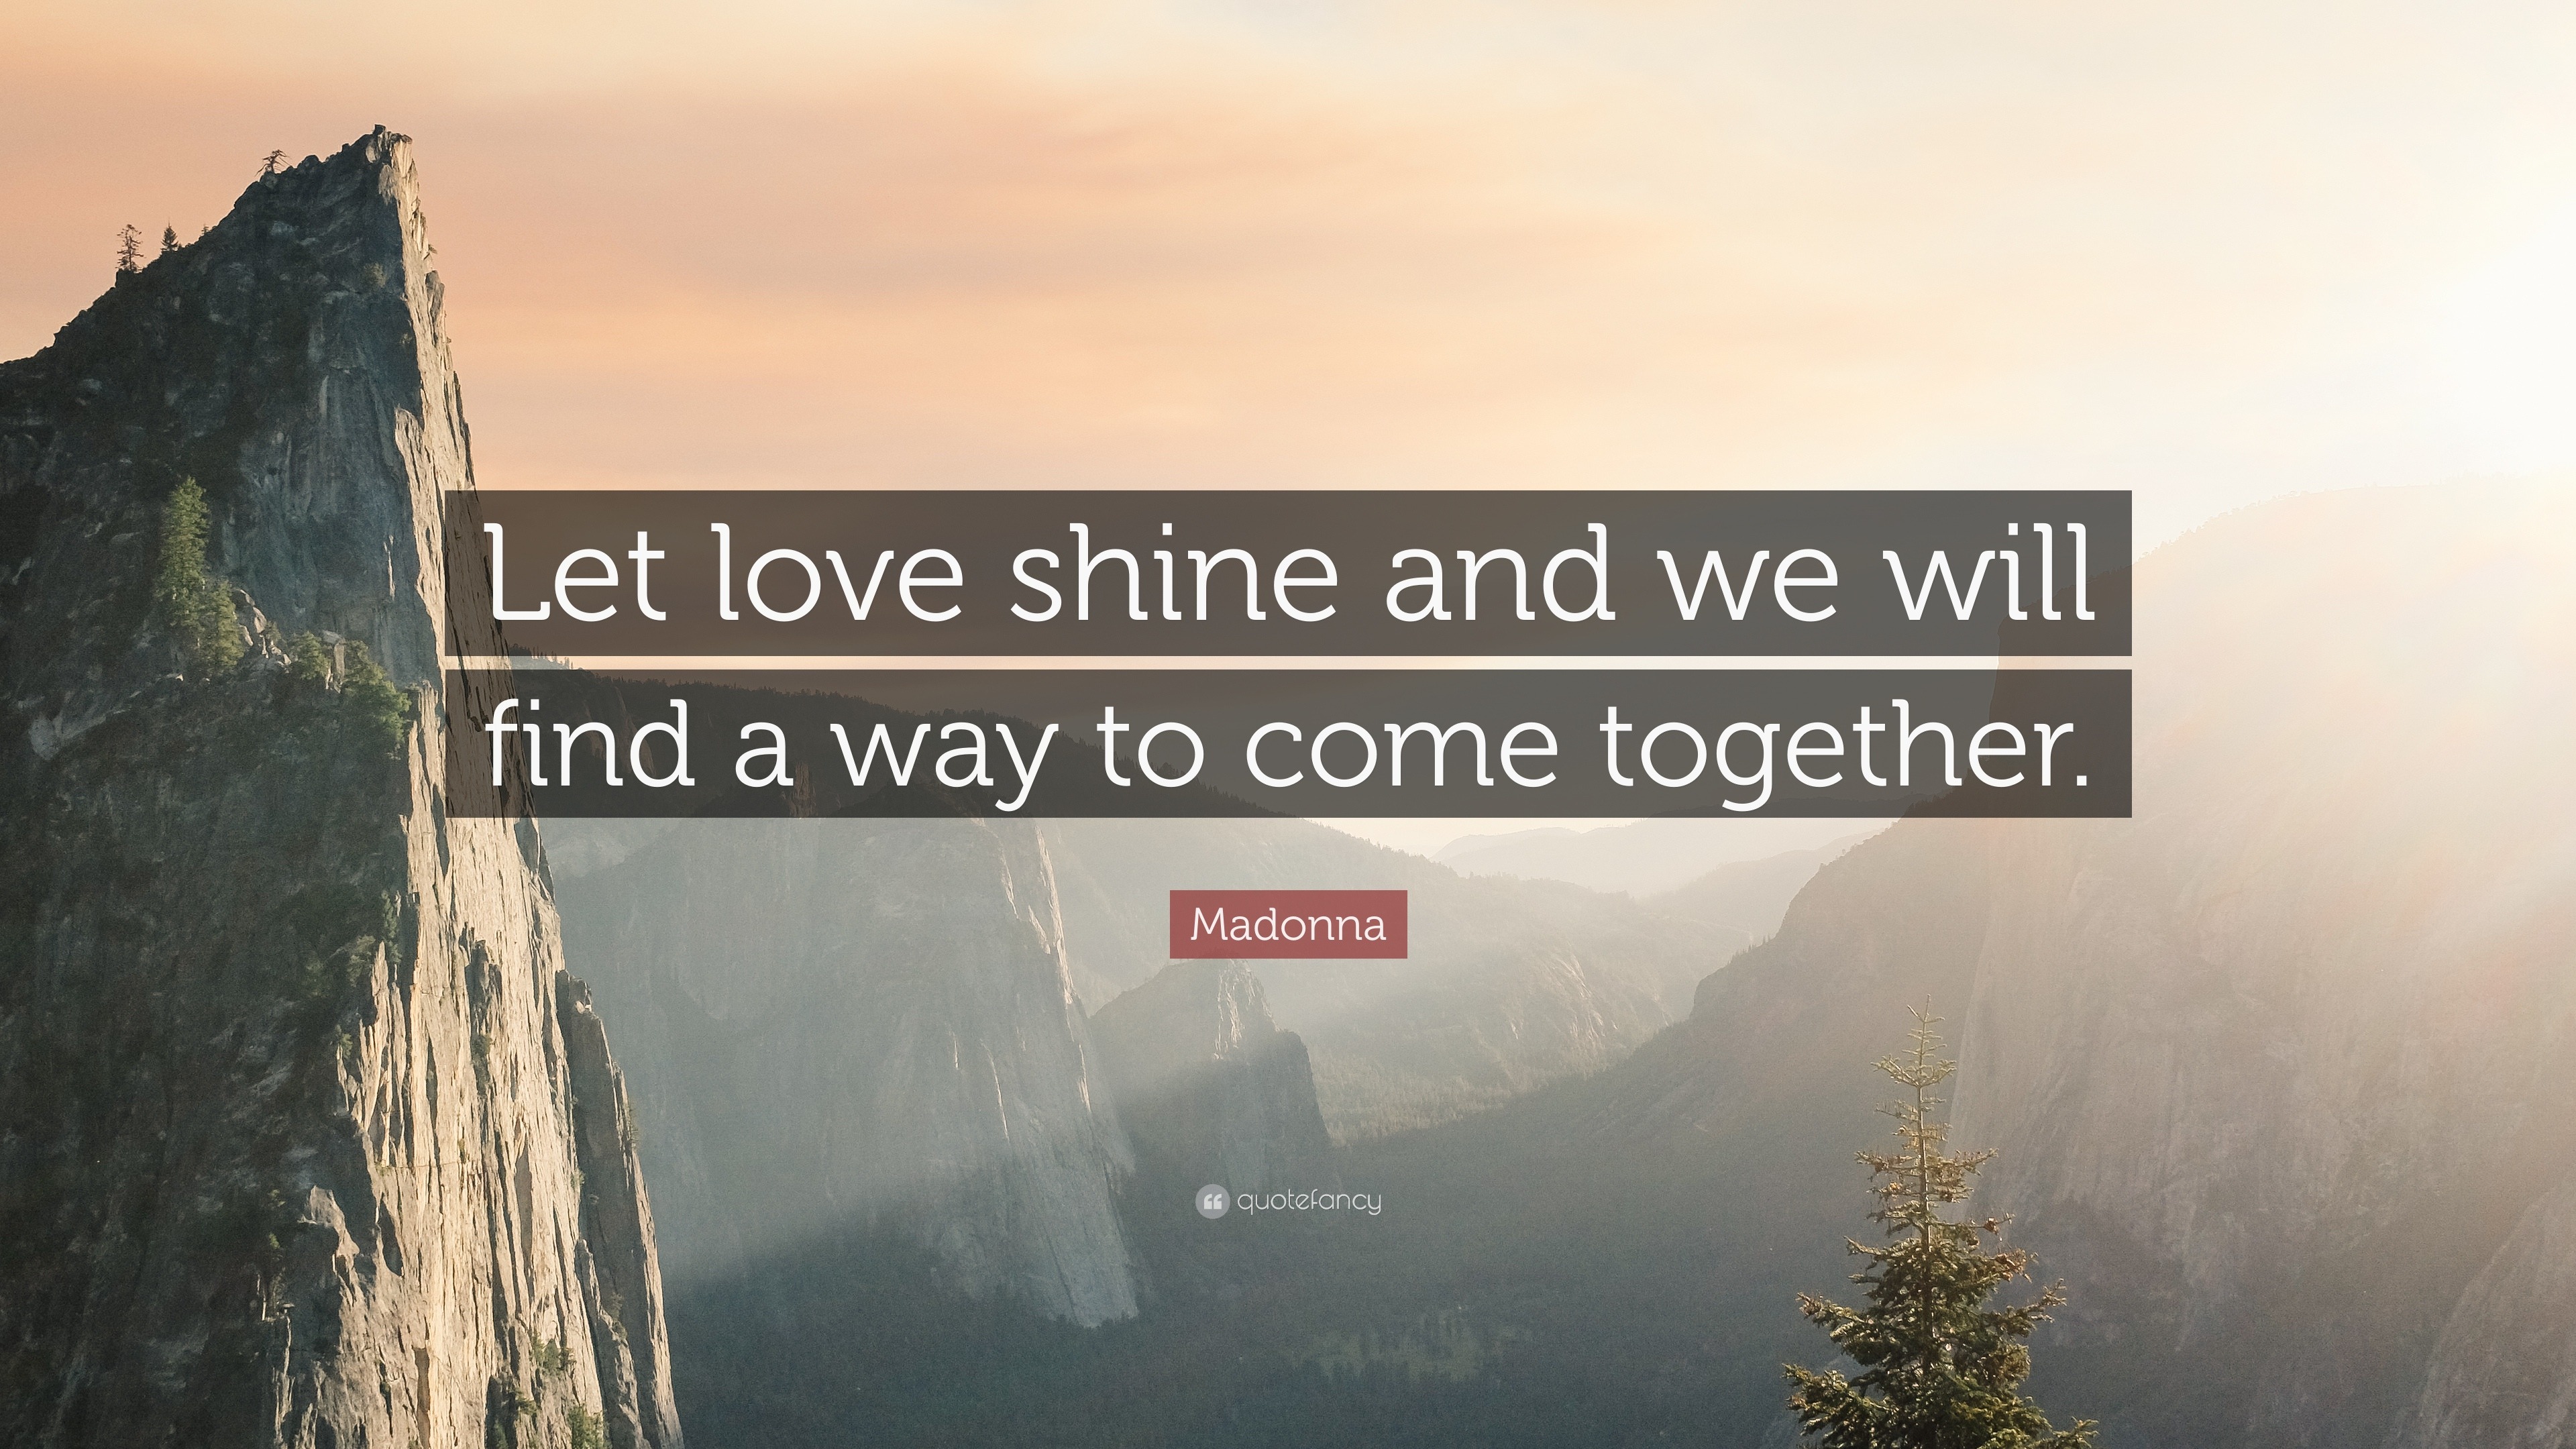 Madonna Quote “Let love shine and we will find a way to e to her